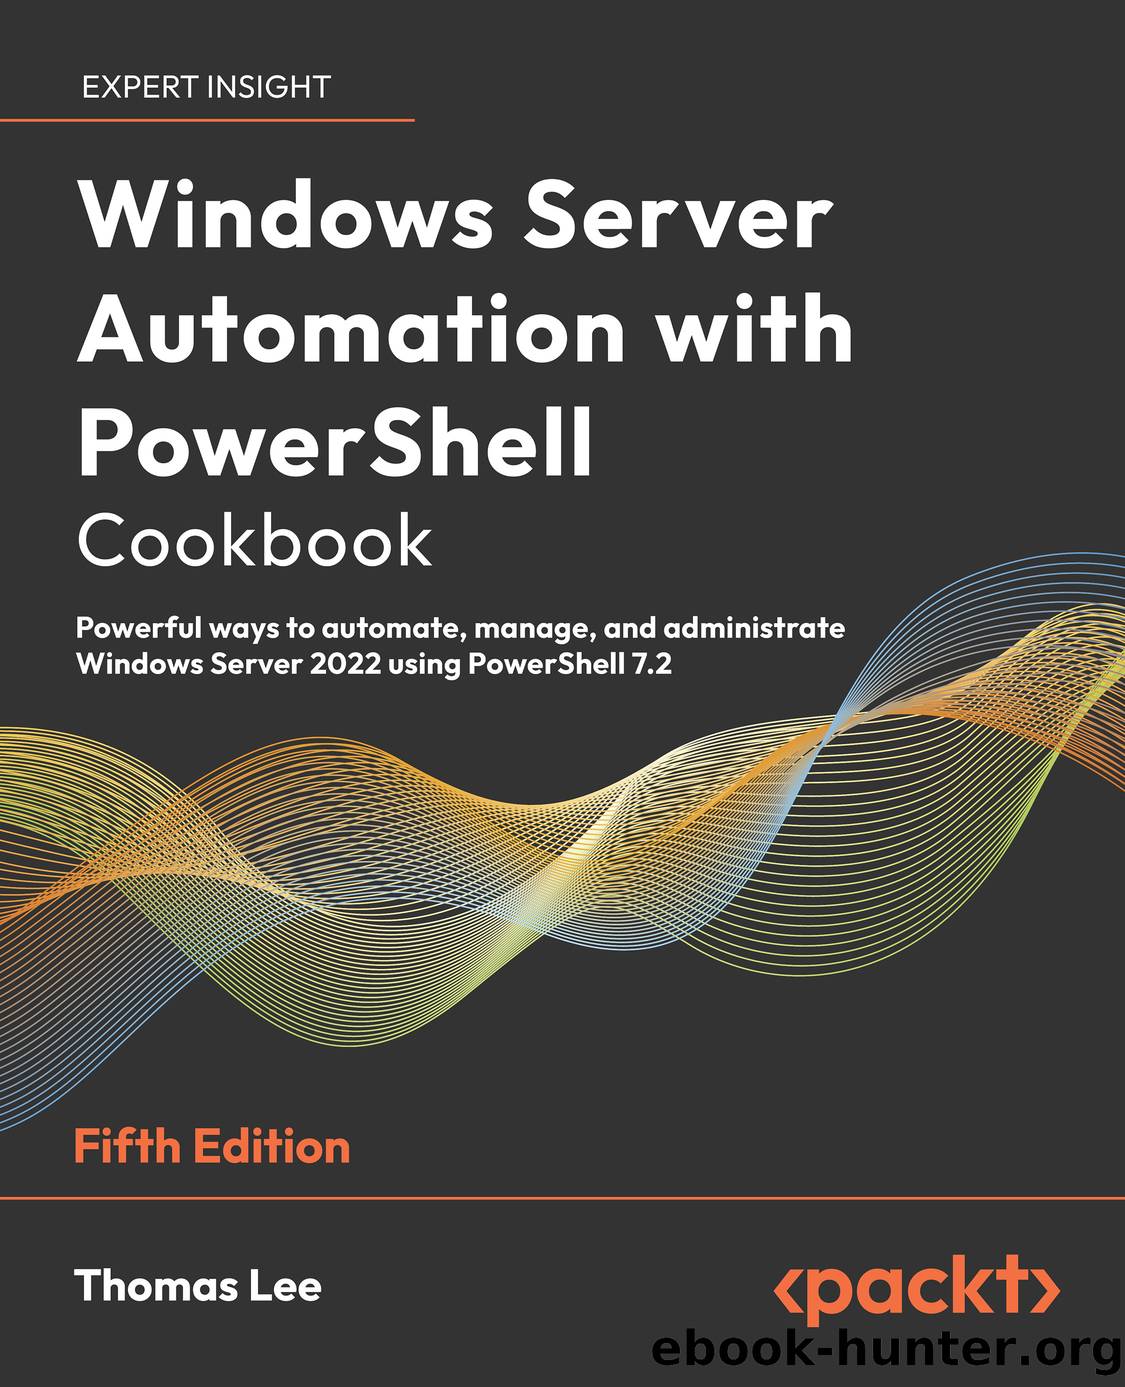 Windows Server Automation with PowerShell Cookbook - Fifth Edition by Thomas Lee